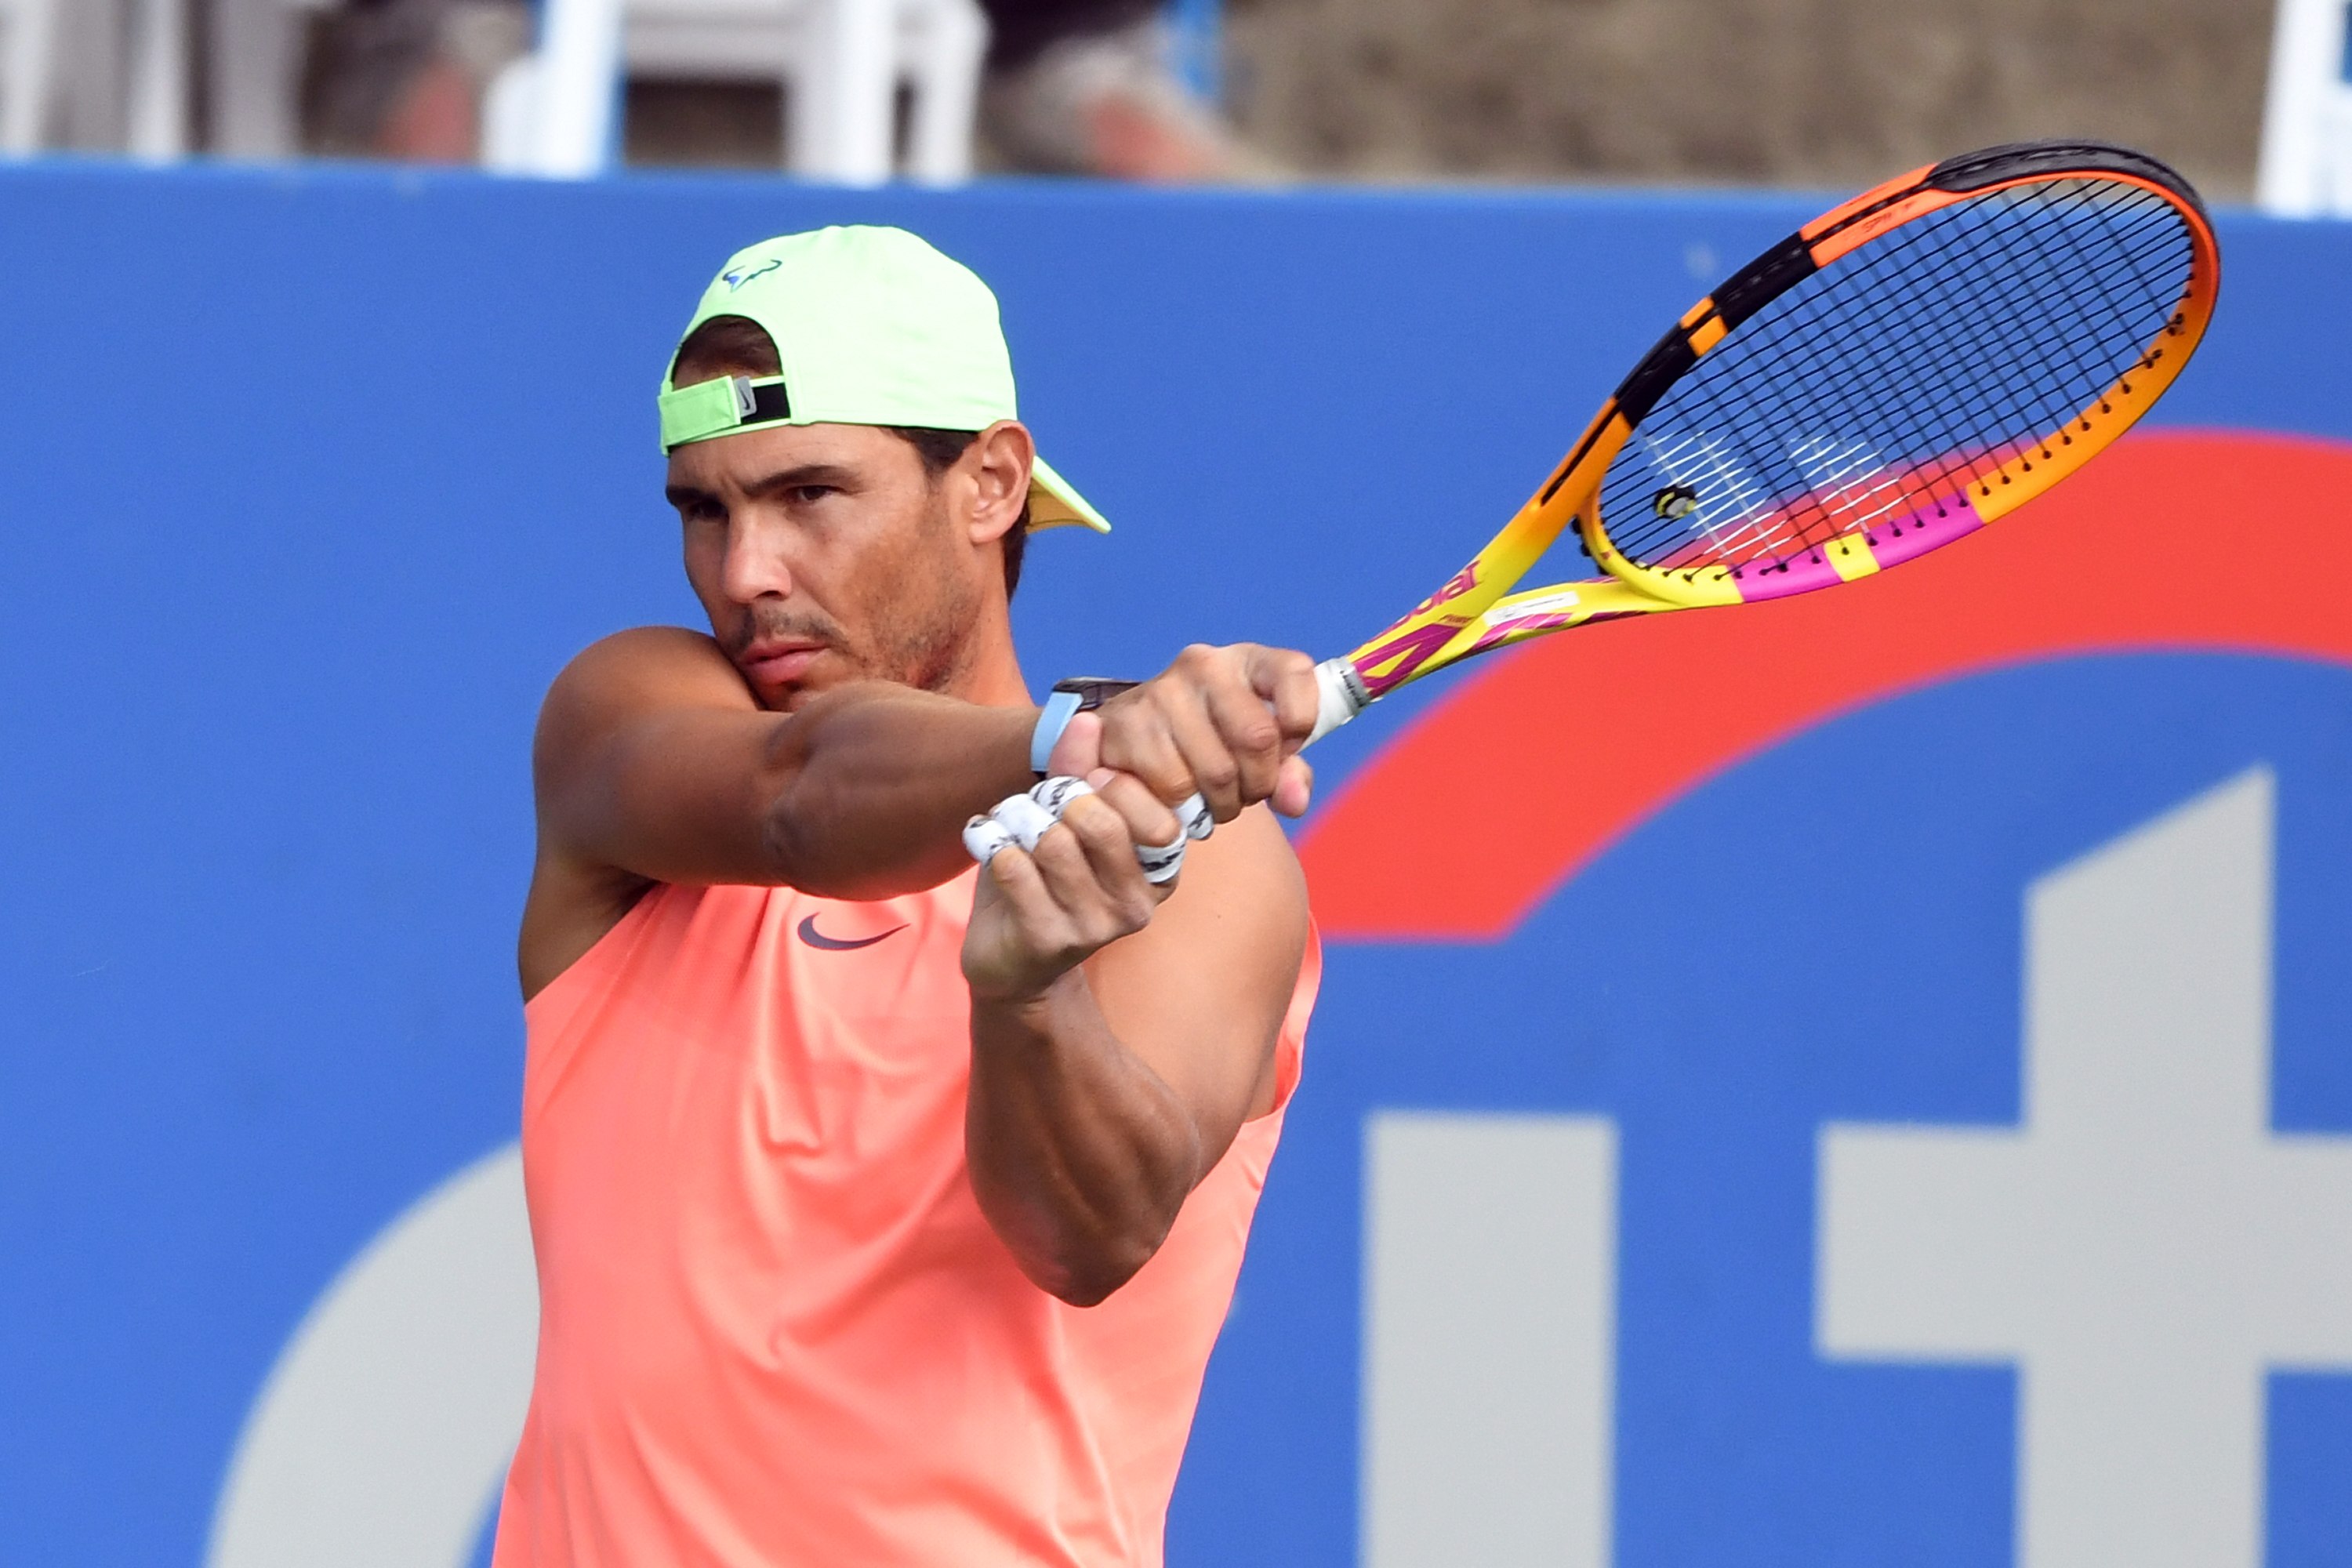 Week in Preview the ATP Citi Open—featuring Rafael Nadal's D.C. debut